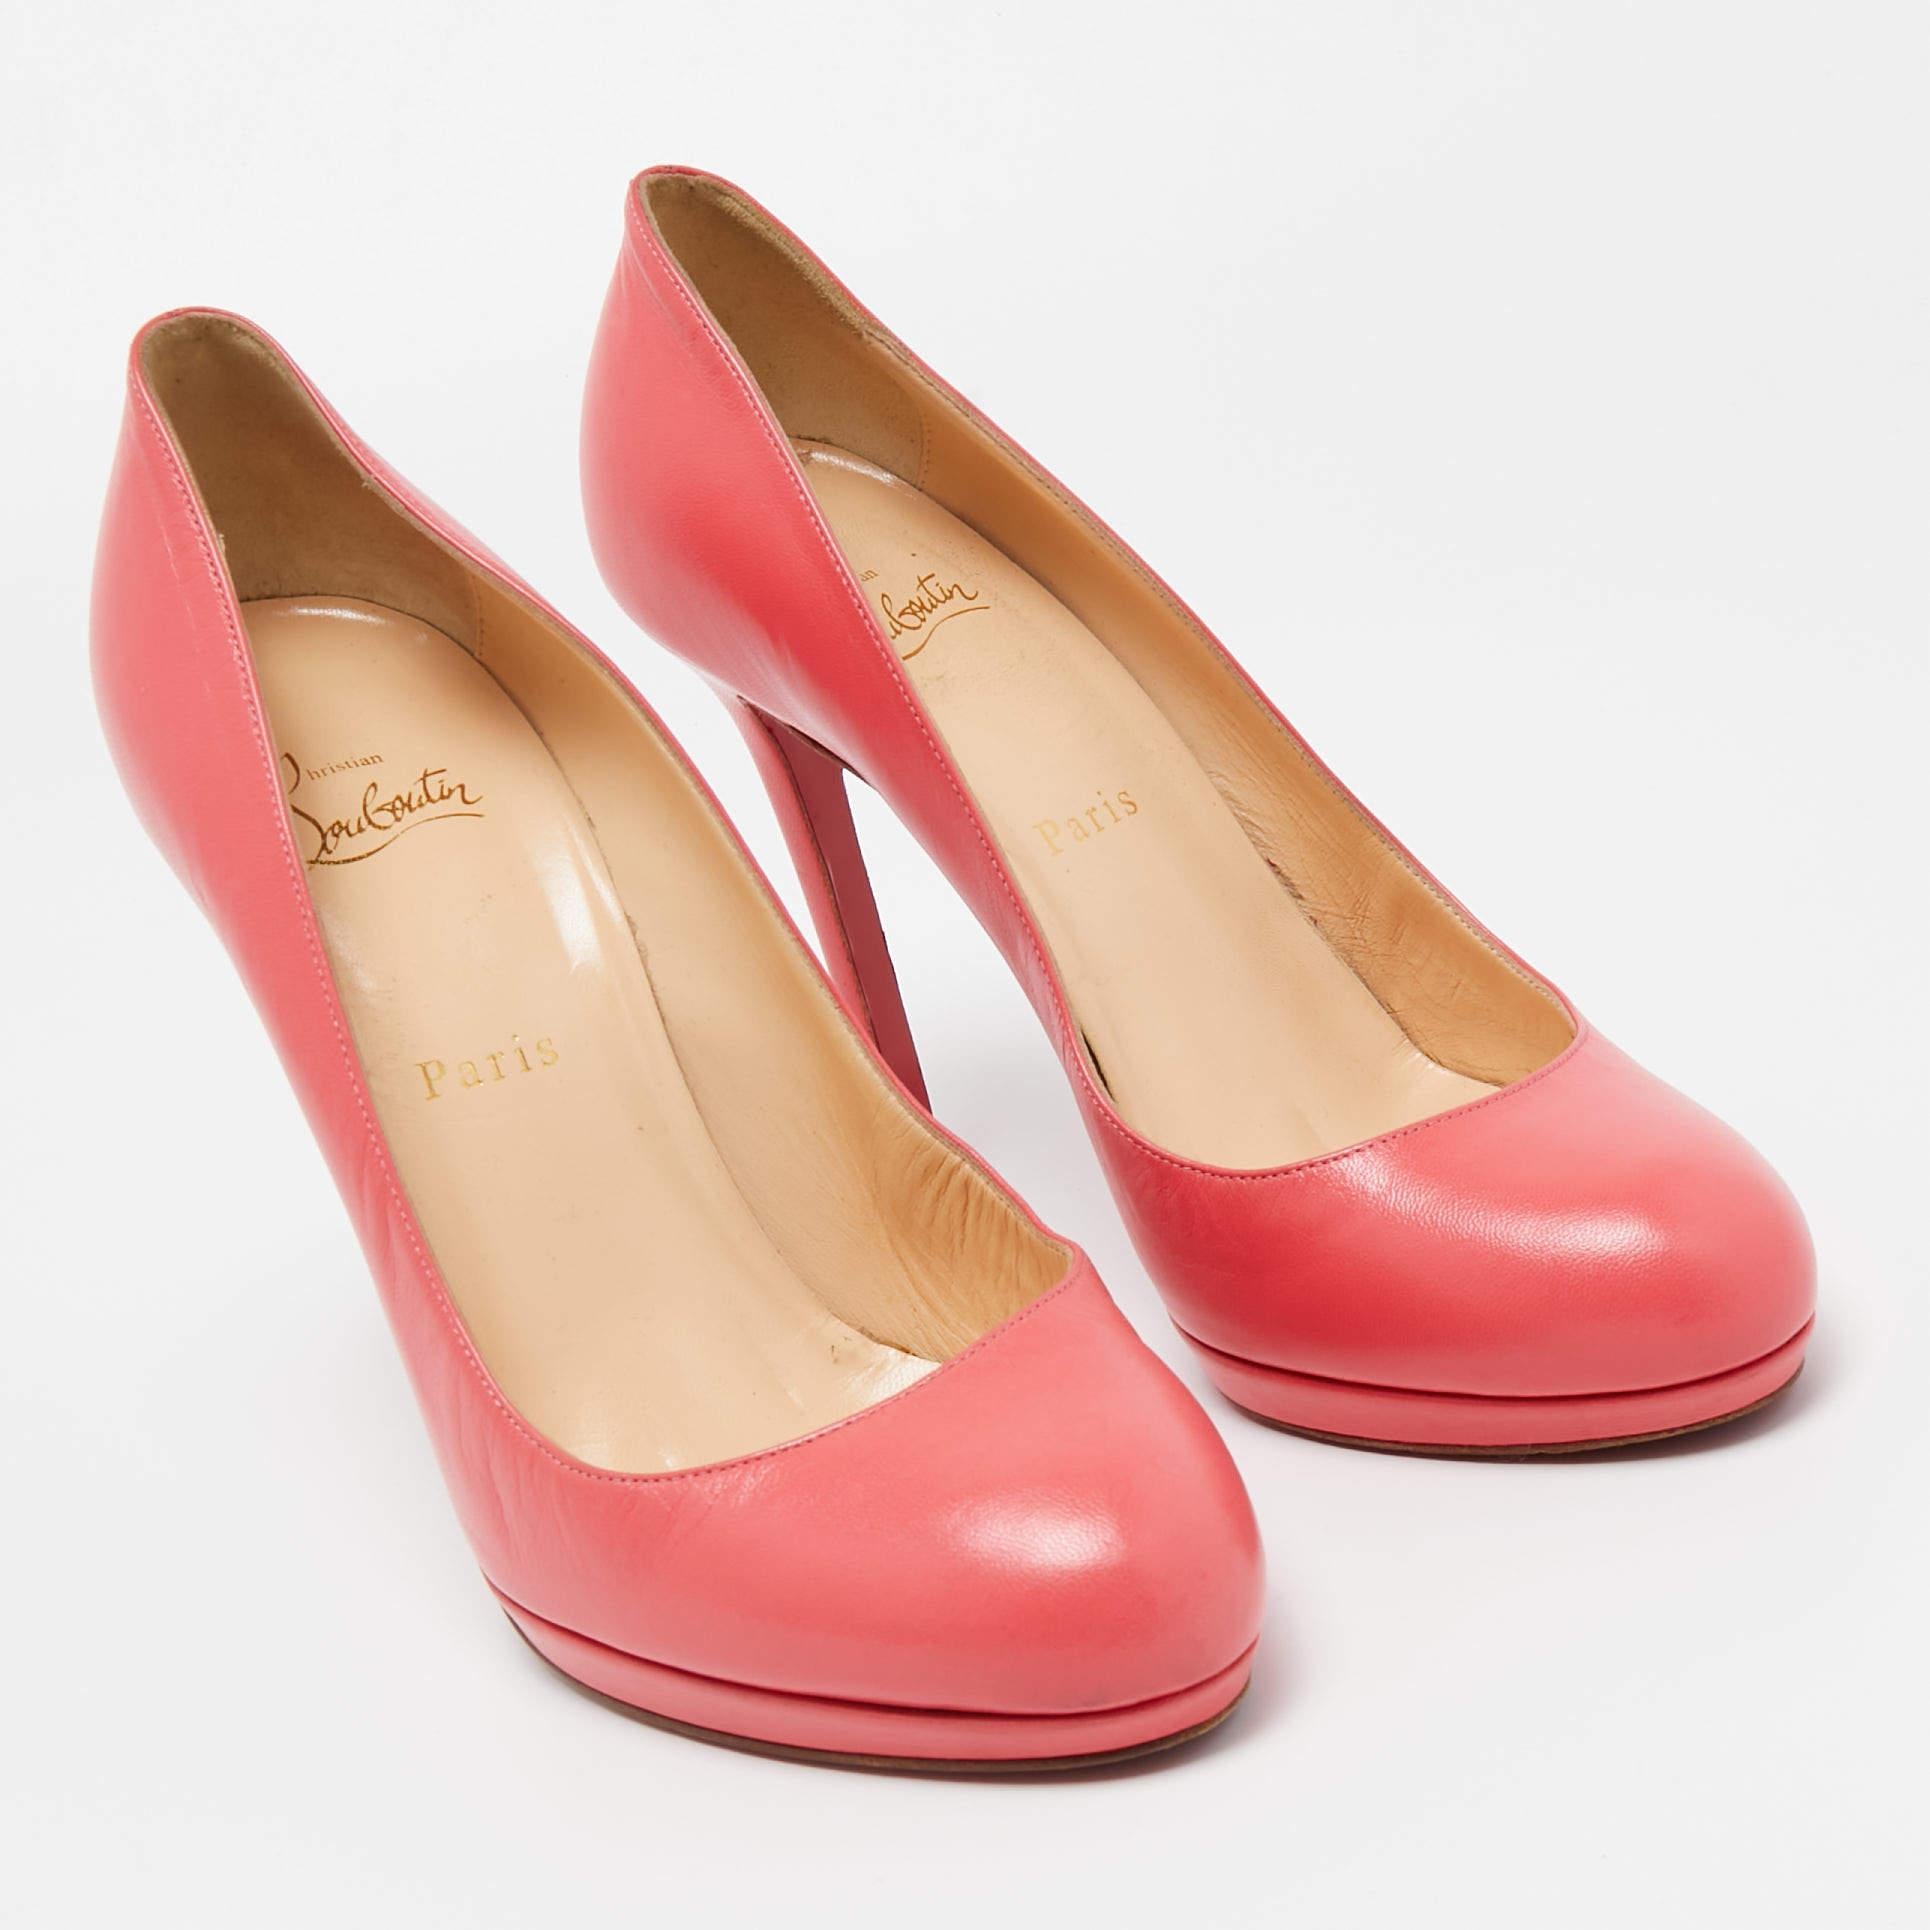 Perfectly sewn and finished to ensure an elegant look and fit, these Christian Louboutin pink shoes are a purchase you'll love flaunting. They look great on the feet.

